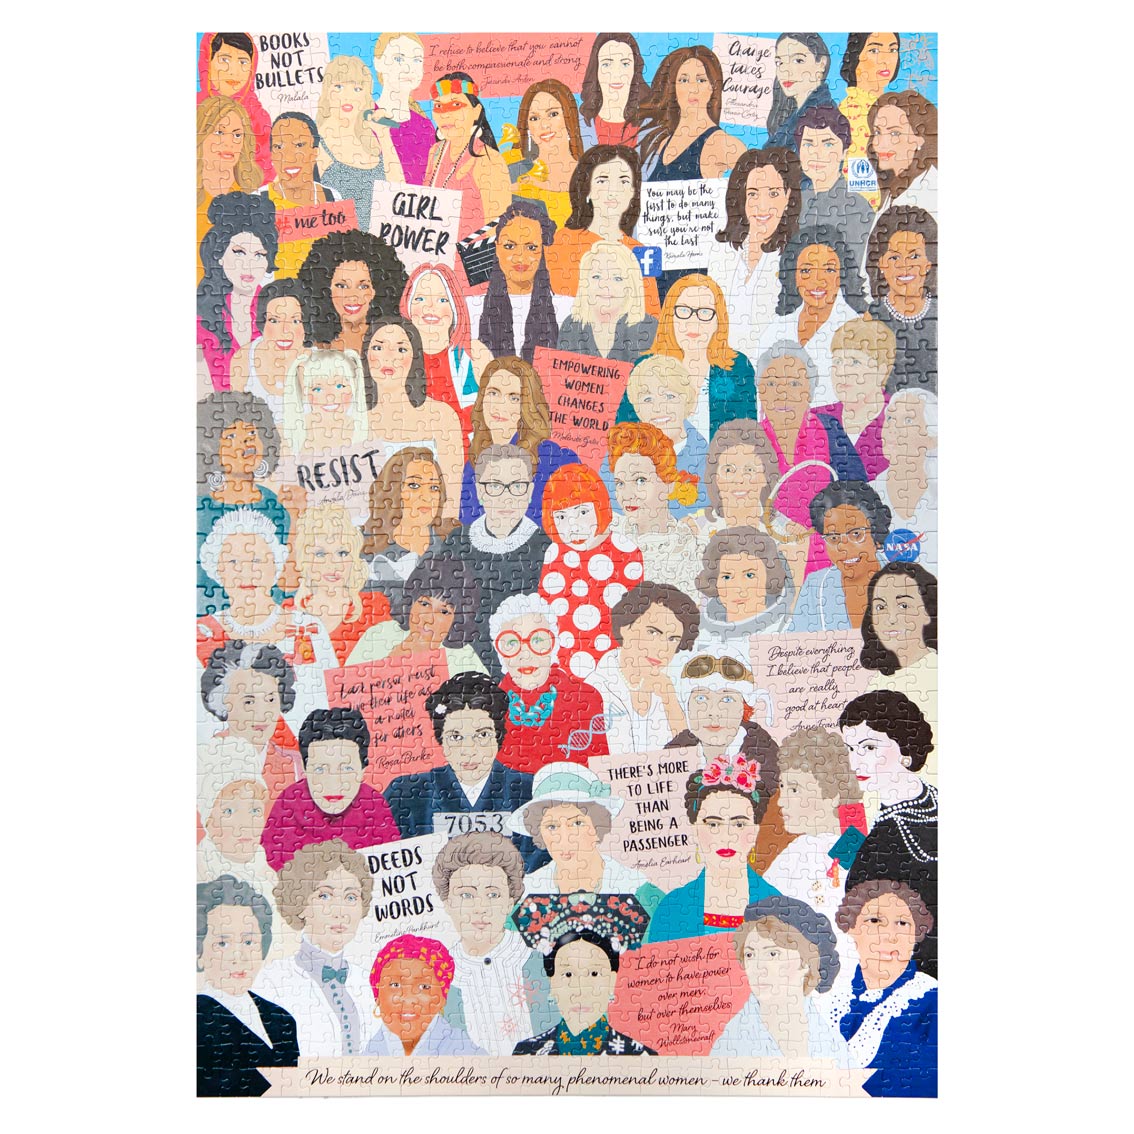 An image of a completed jigsaw puzzle of Phenomenal Women.